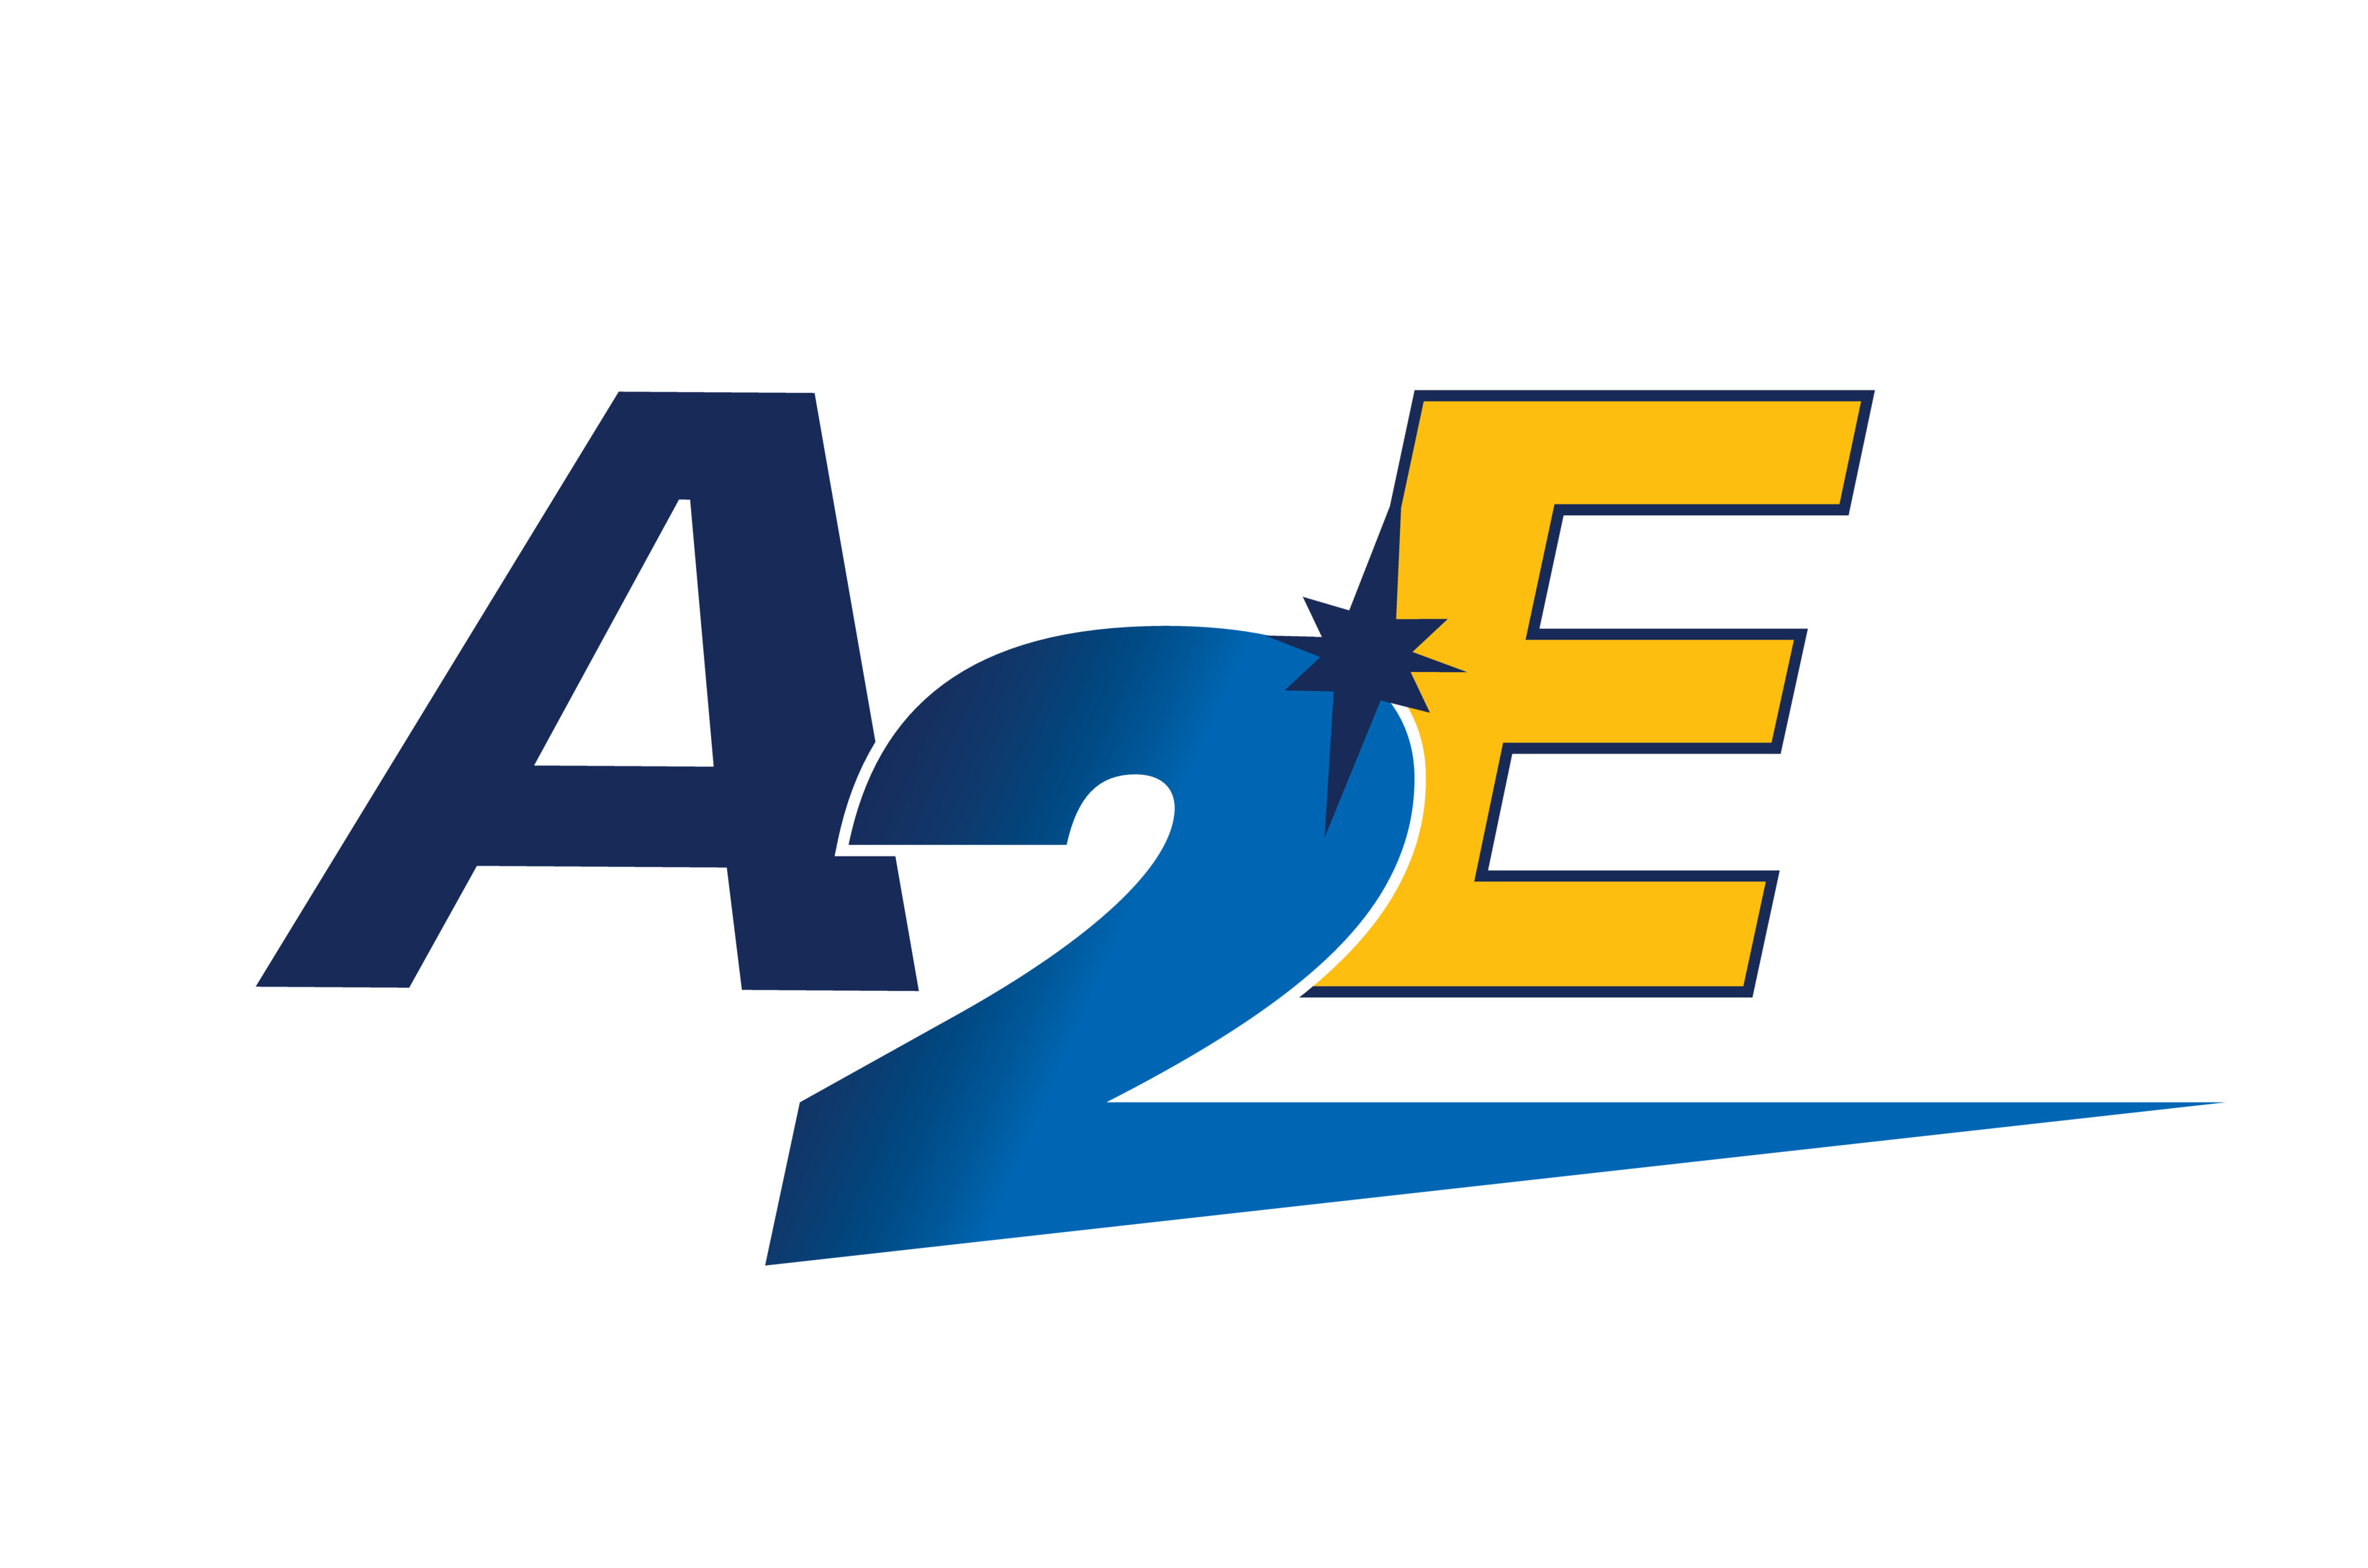 The logo for N A U's Access2Excellence initiative, A2E